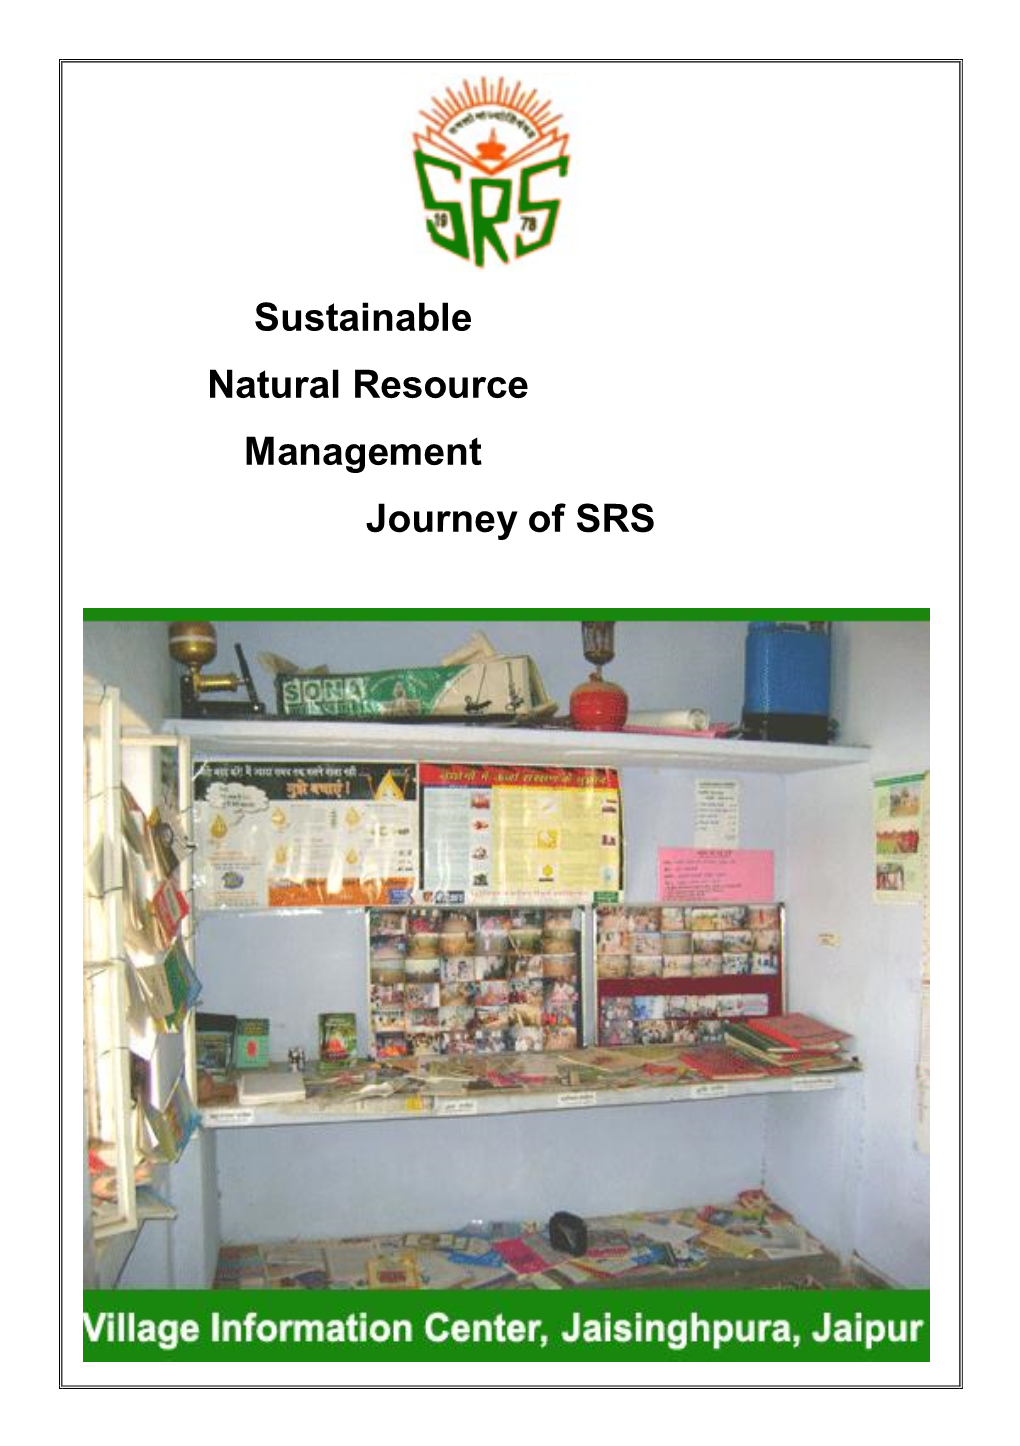 Sustainable Natural Resource Management Journey of SRS